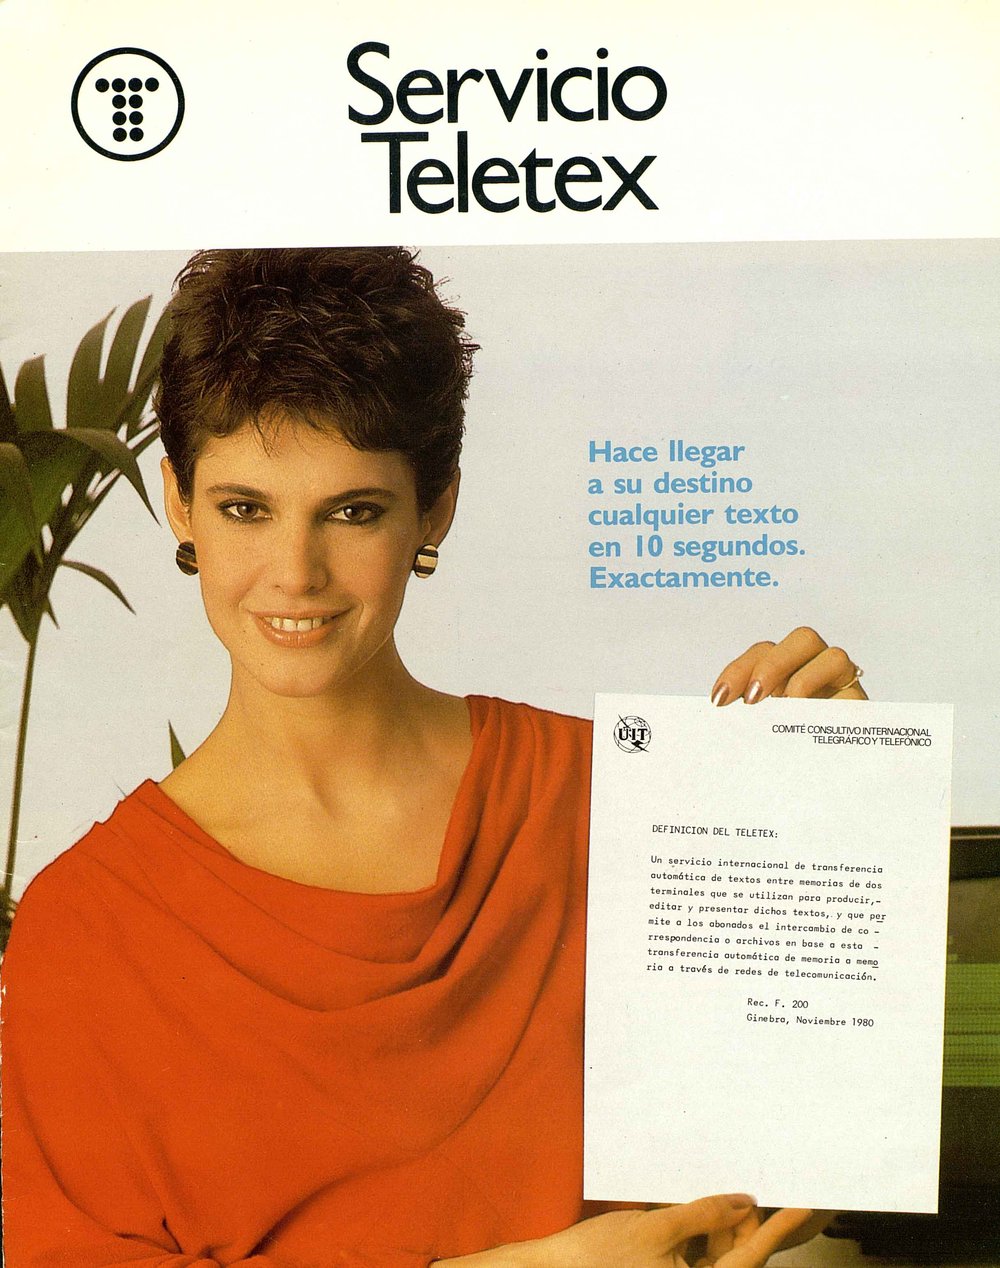 TELETEX SERVICE : ANY TEXT IS DELIVERED TO ITS DESTINATION WITHIN 10 SECONDS.